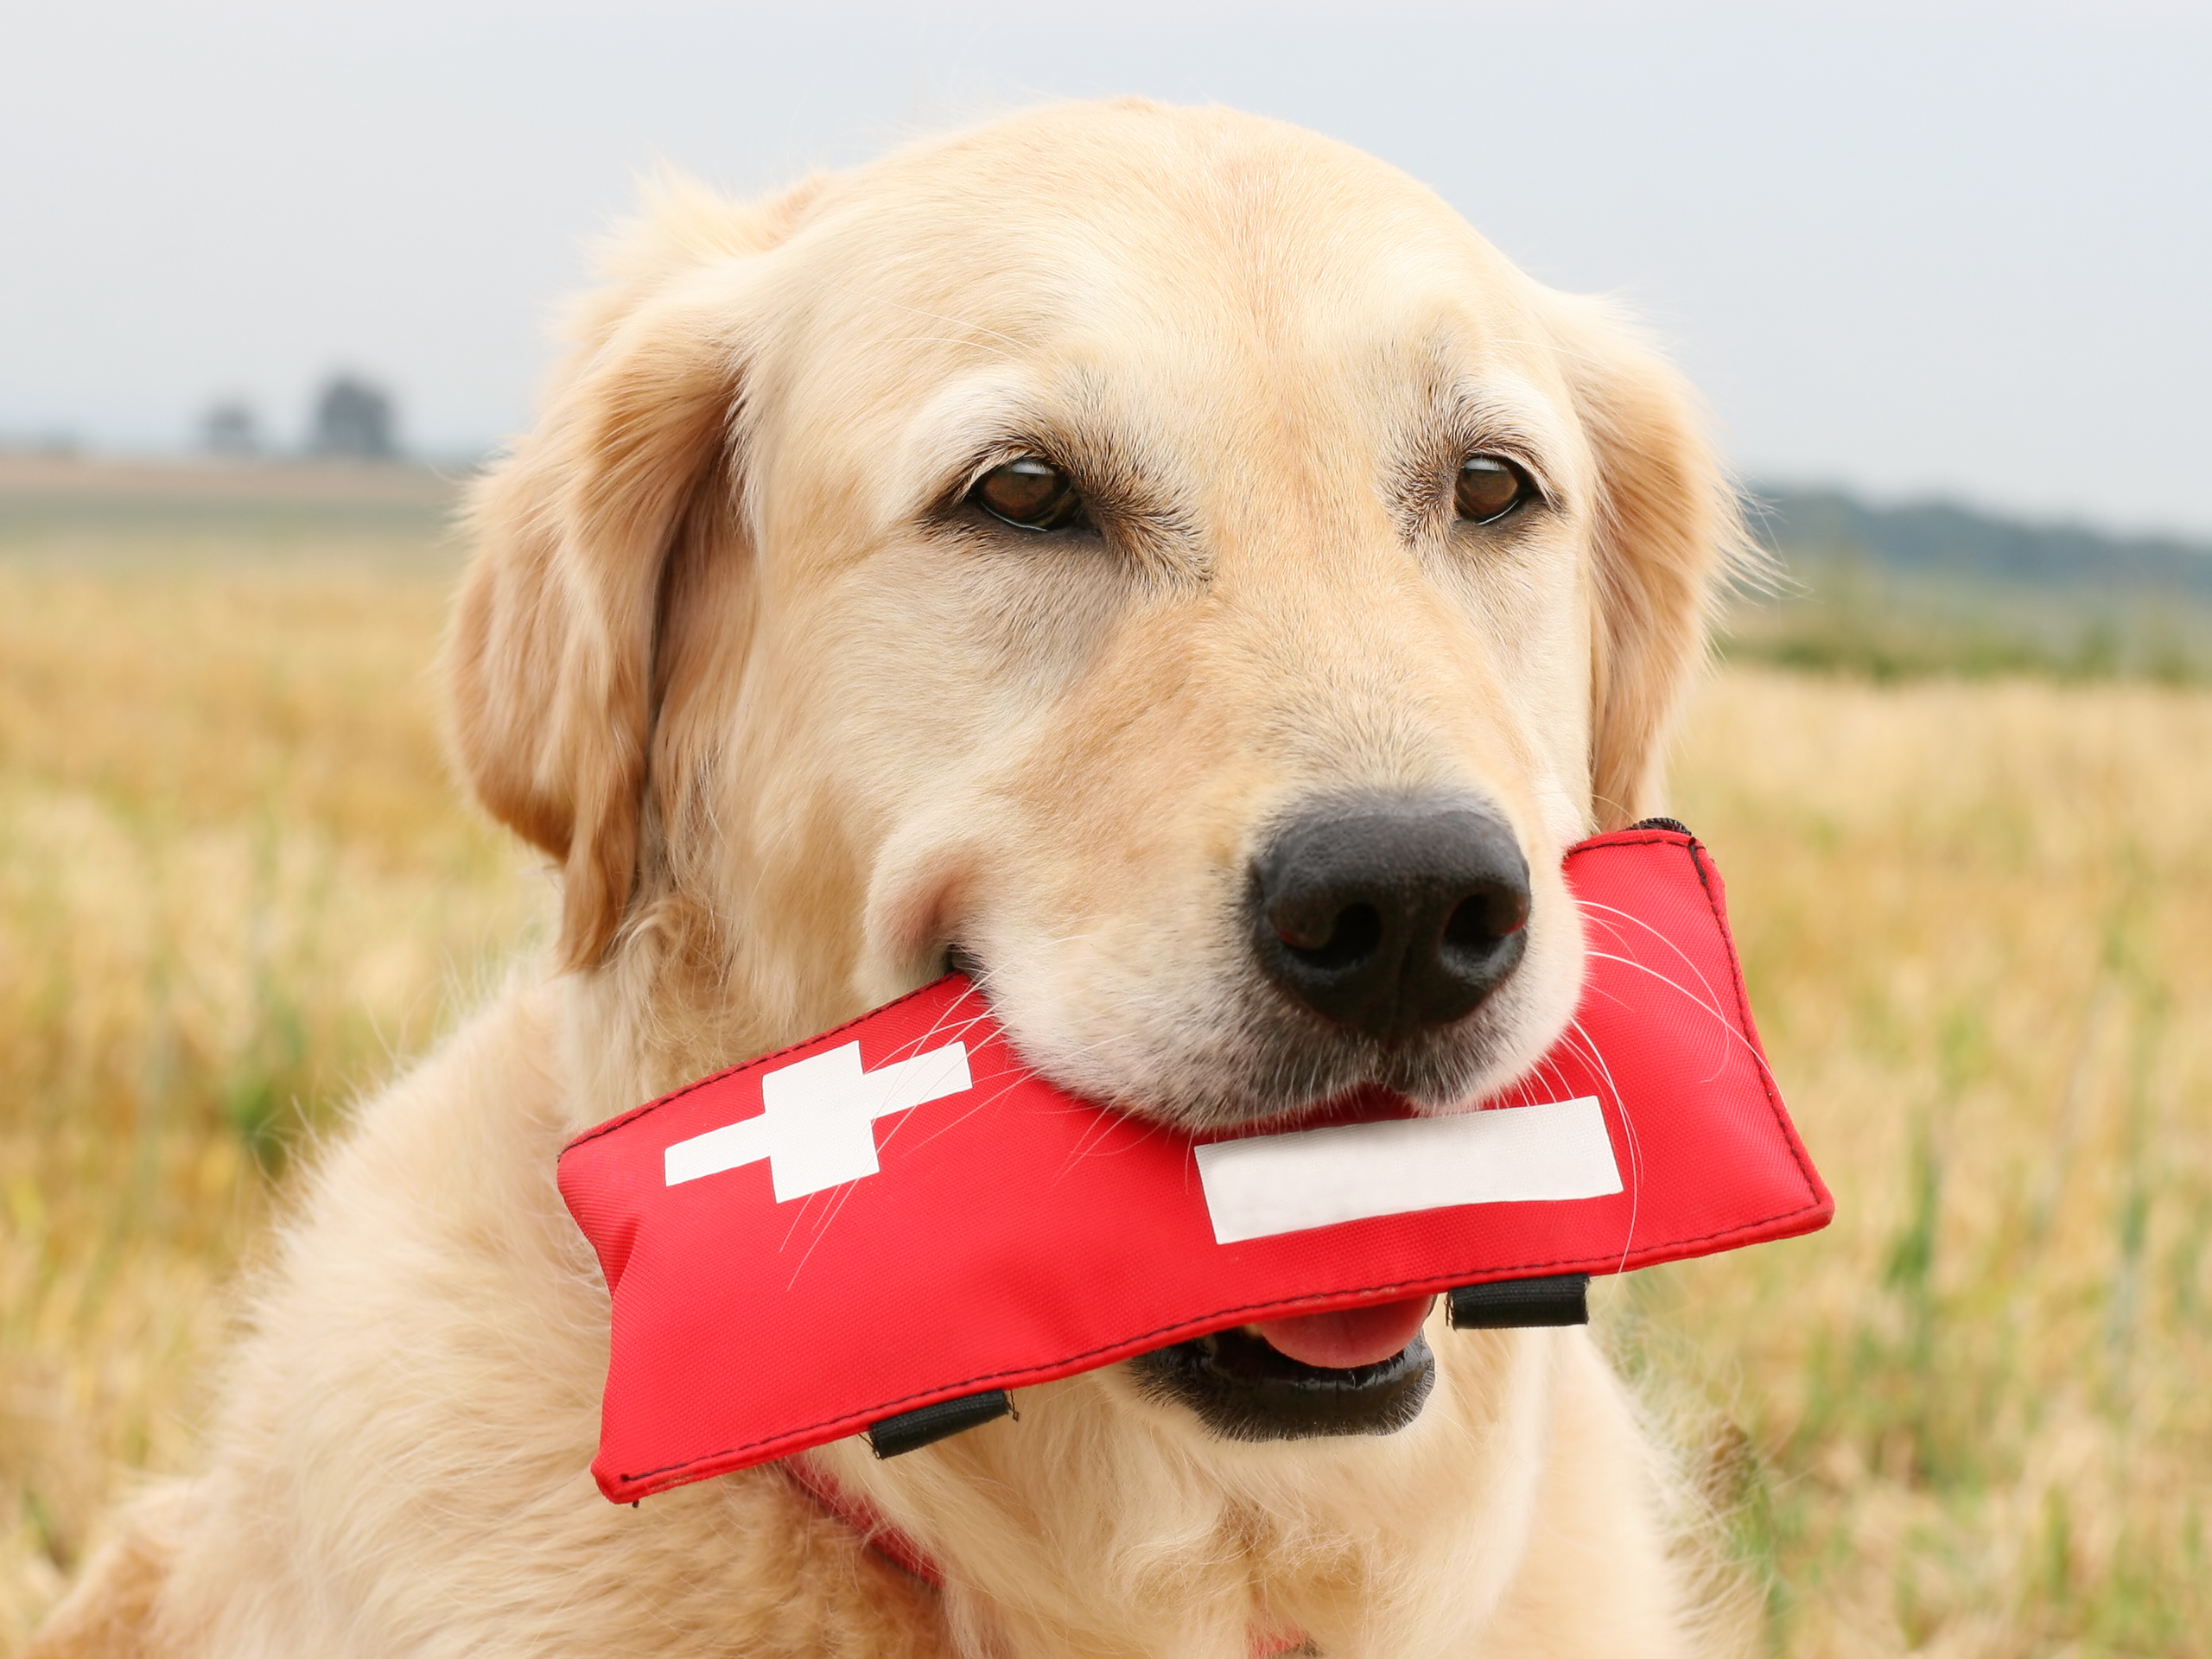 Dog carrying a first aid kit in their mouth